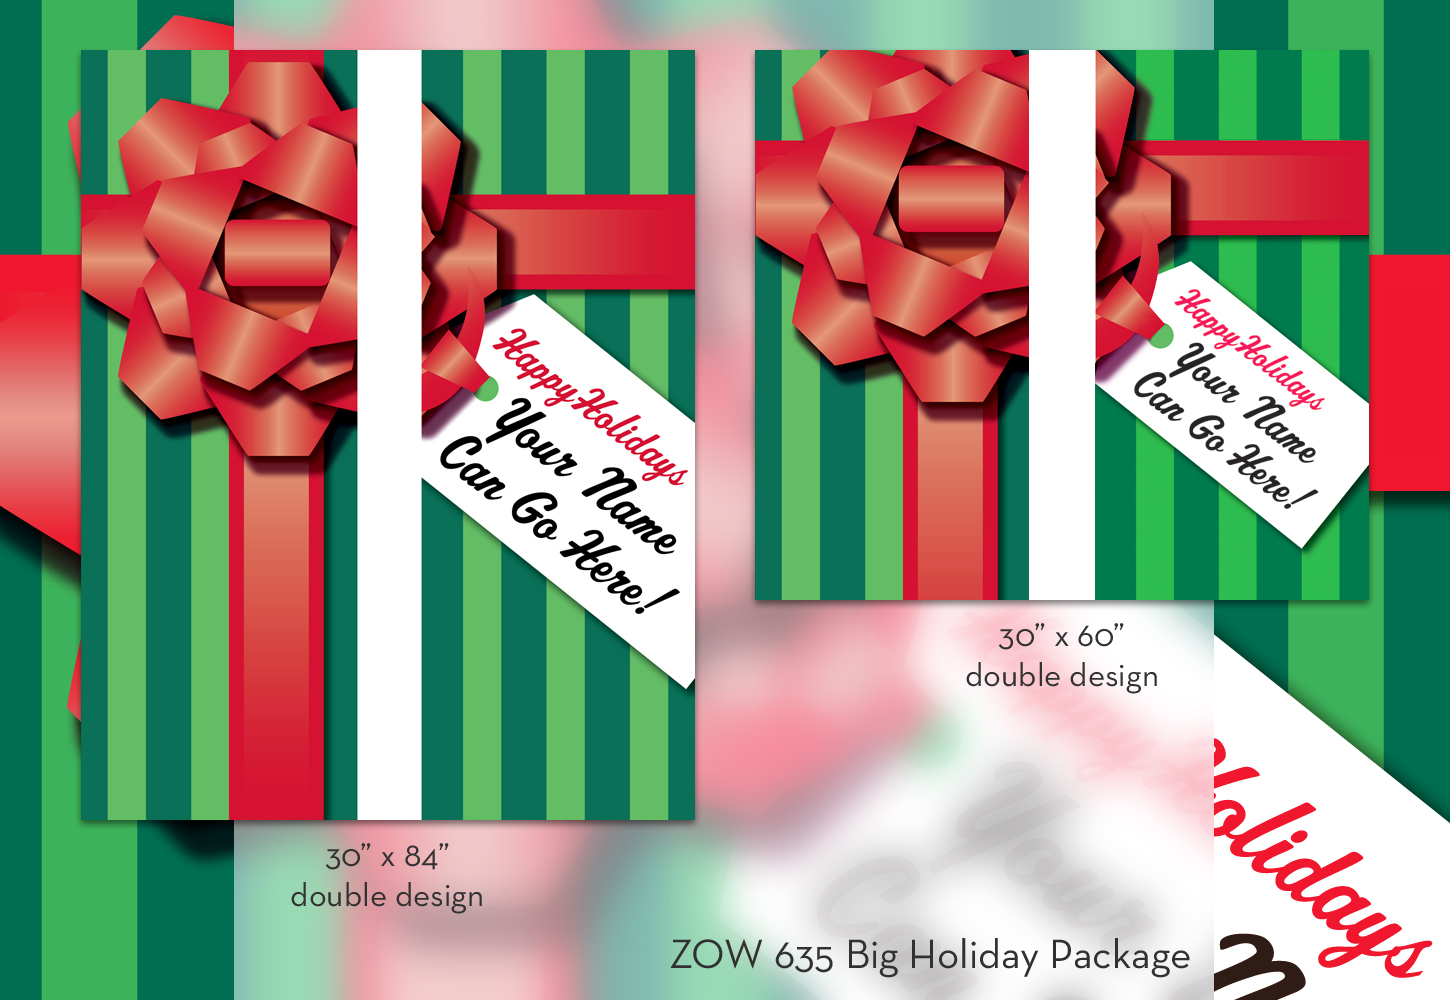 ZOW 635 Big Holiday Package